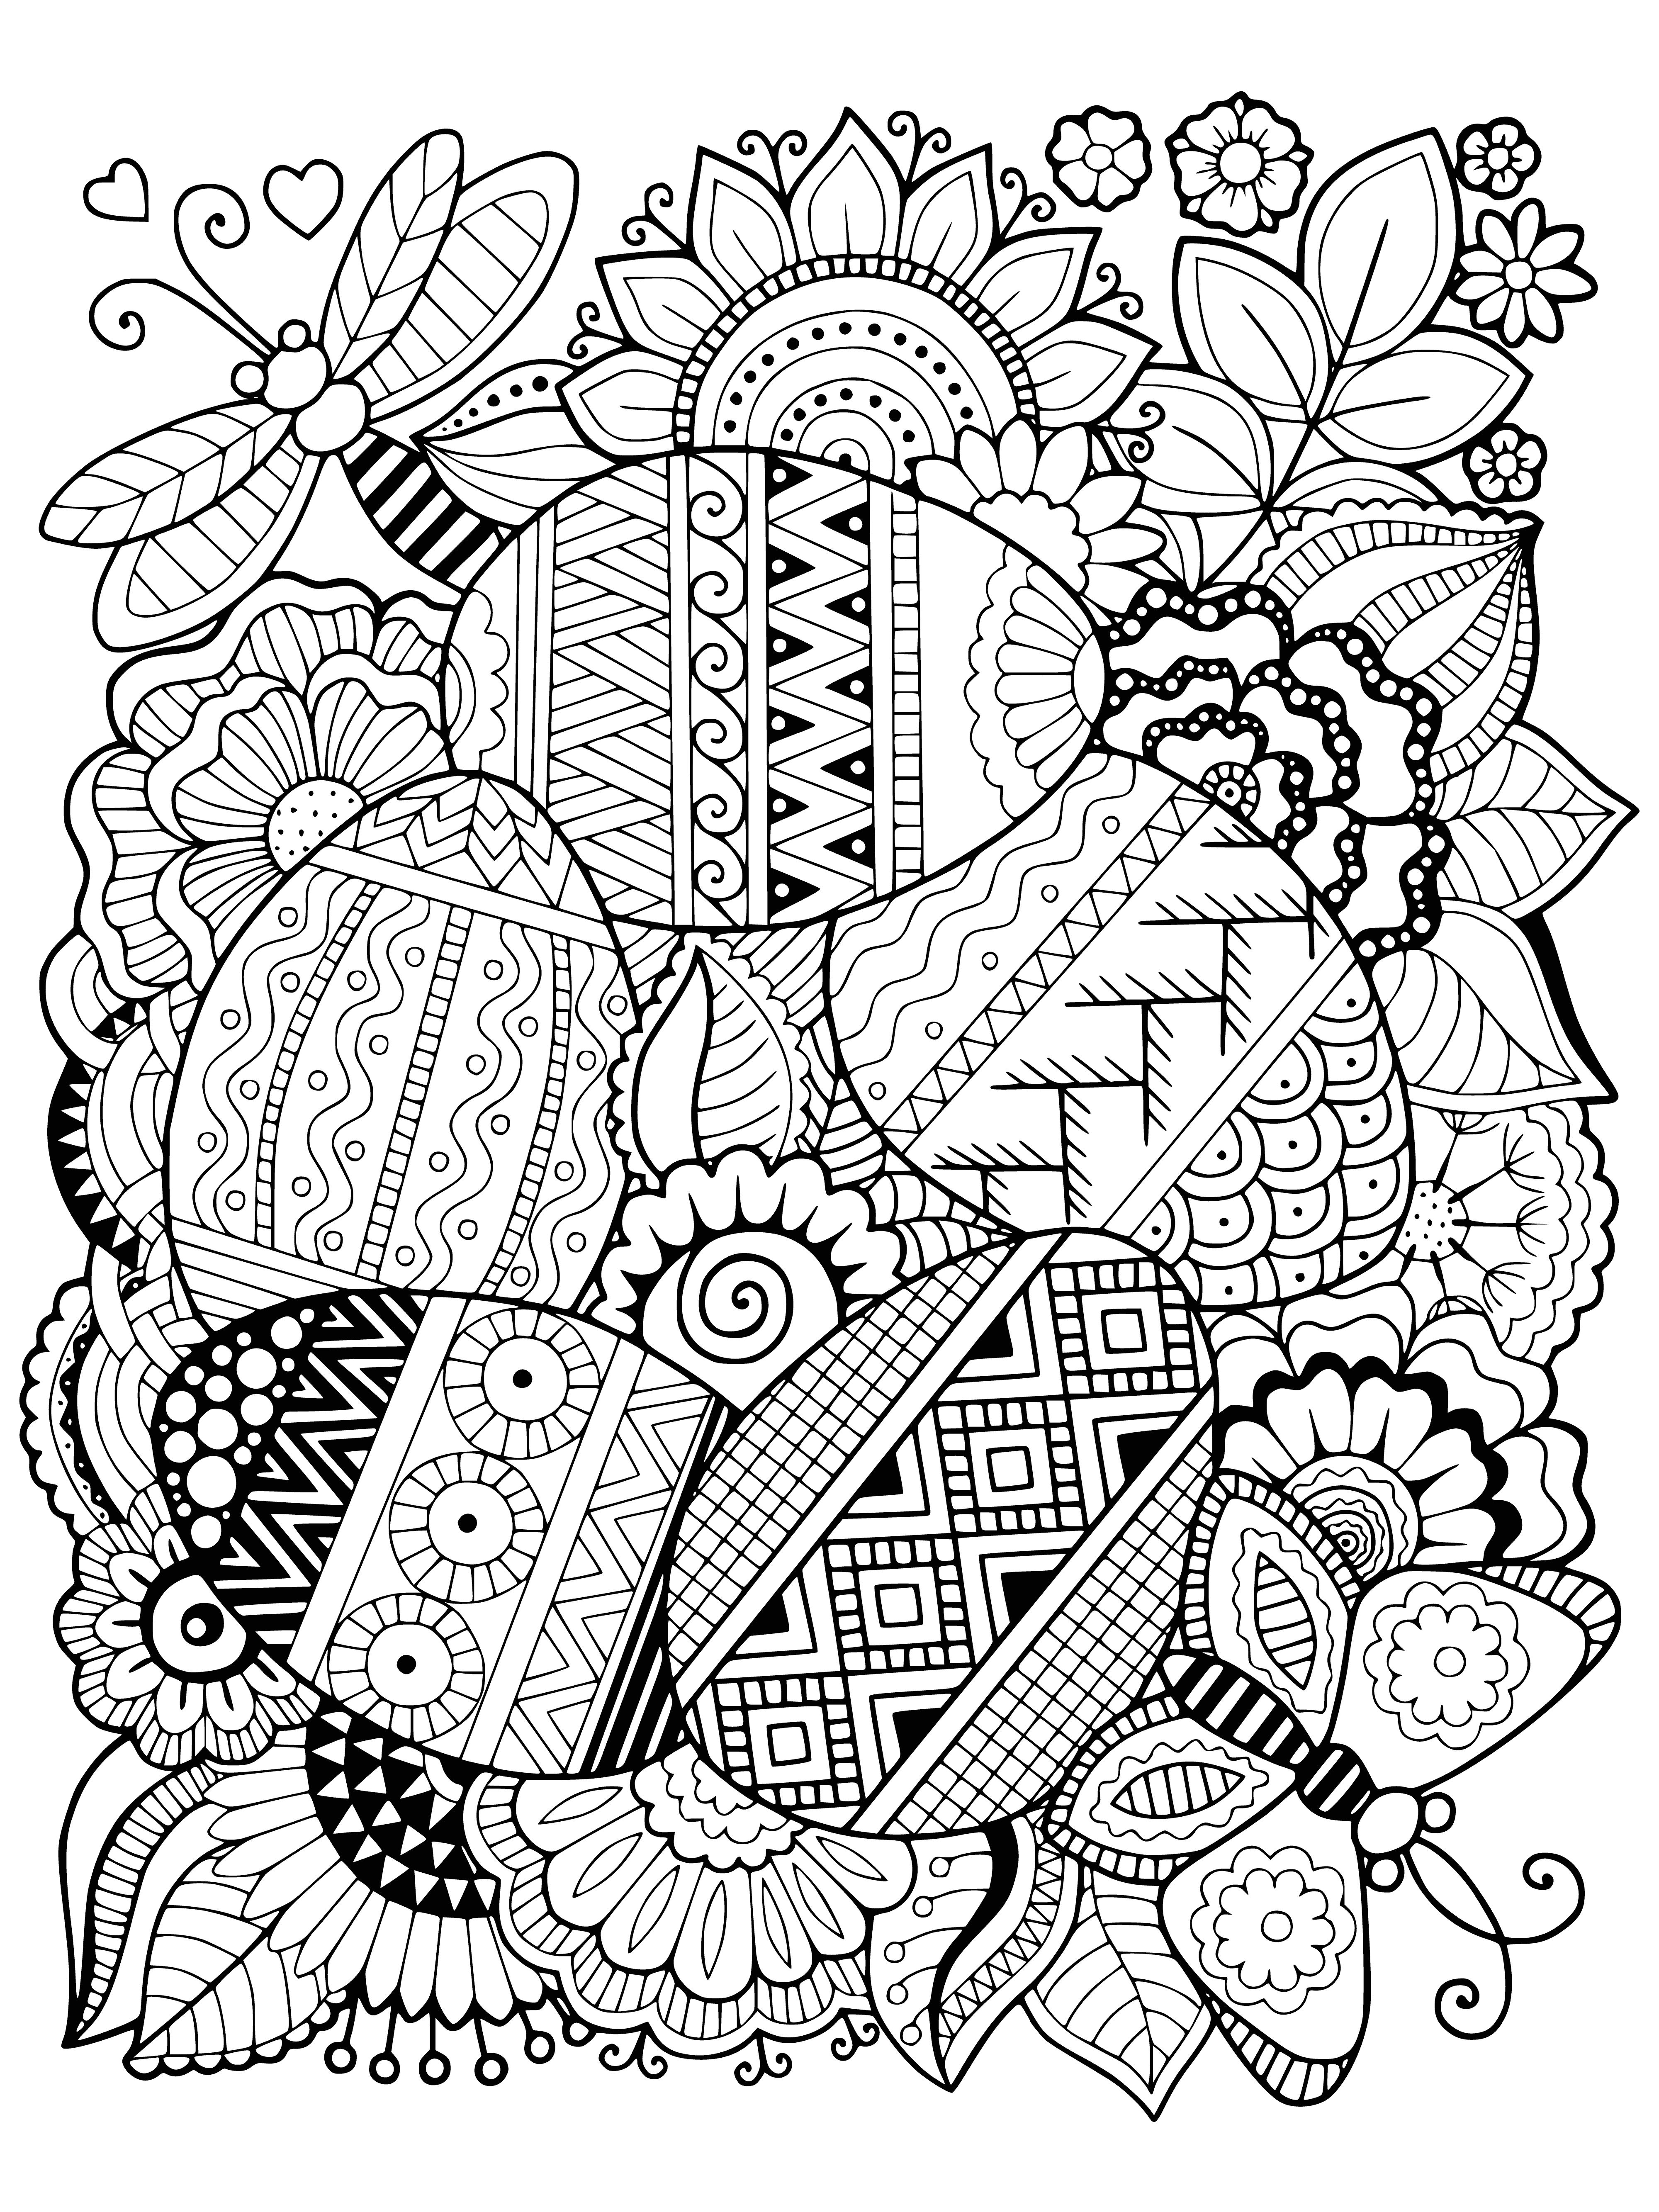 coloring page: Easter eggs of various stripes, spots, and solid colors in a basket – a delightful sight!